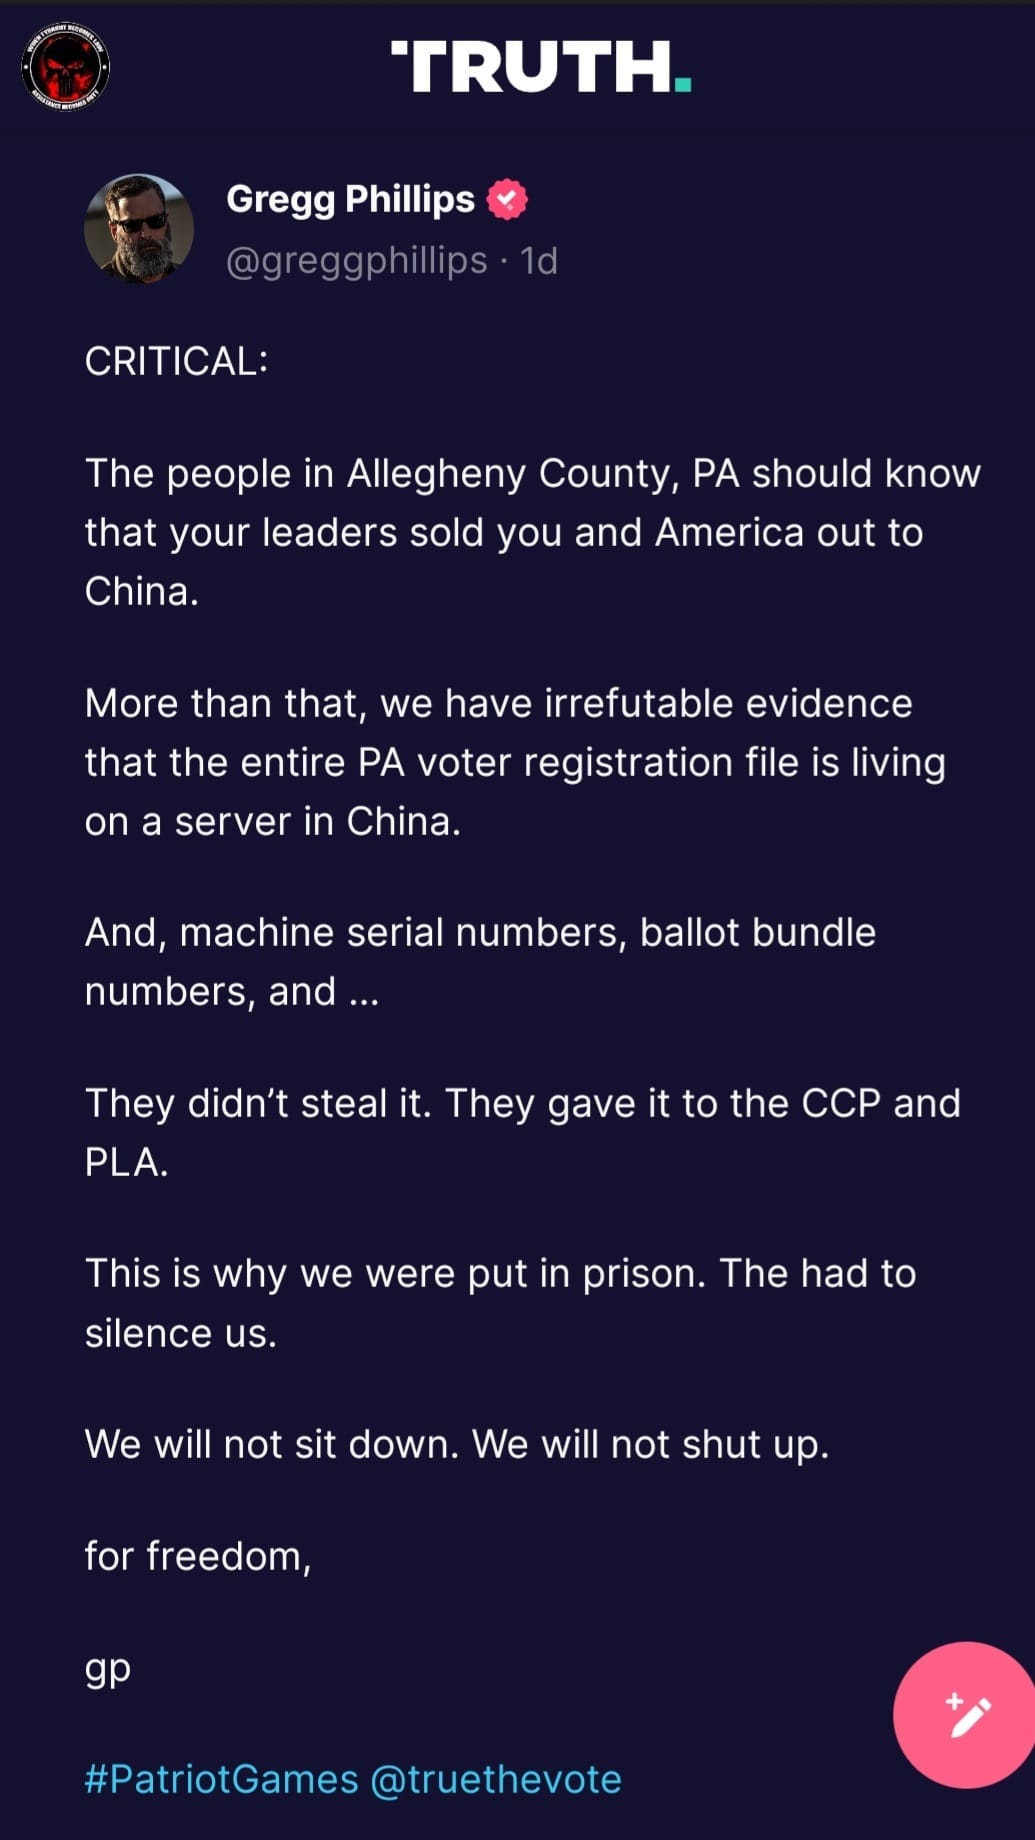 May be an image of text that says 'TRUTH. Gregg Phillips @greggphillips.1d CRITICAL: The people in Allegheny County, PA should know that your leaders sold you and America out to China. More than that, we have irrefutable evidence that the entire PA voter registration file is living on a server in China. And, machine serial numbers, ballot bundle numbers, and... They didn't steal it. They gave it to the CCP and PLA. This is why we were put in prison. The had to silence us. We will not sit down. We will not shut up. for freedom, gp #PatriotGames @truethevote'